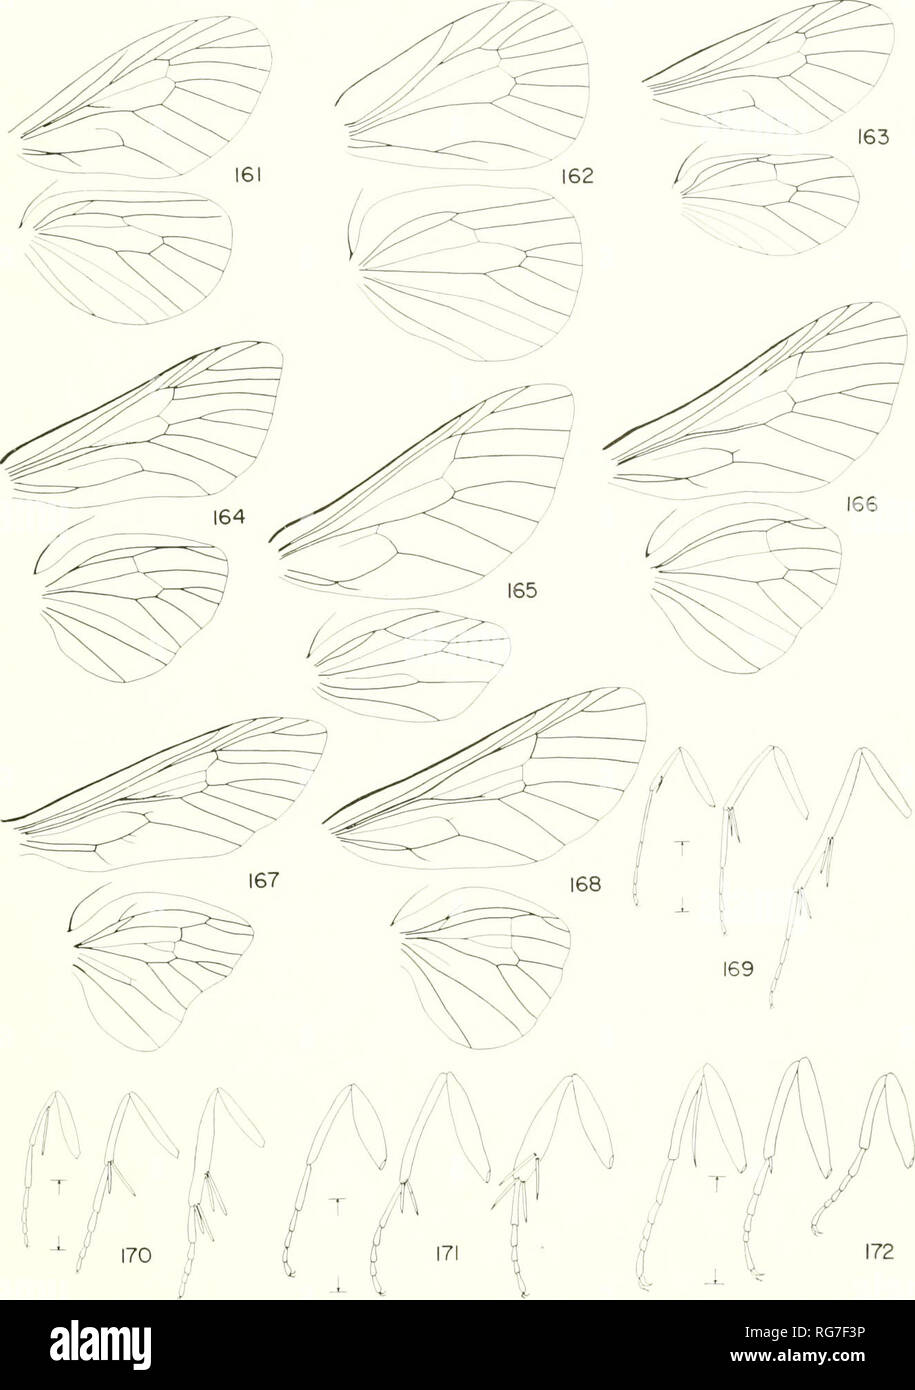 . Bulletin - United States National Museum. Science. BAGWORAI MOTHS OF THE WESTERN HEMISPHERE 197. Figures 161-172.âWins venation and IeÂ£;s: 161, Ilyaloscotes pithopot-ra; 162, Basirhidus tracyi; lCi3, Coloneura fragilis: 164, ThanaU,psyche canescens; 165. Aiumula liinpia: 166, Biupsyche apicalis; 167, Oiki-ticus kirbyi; l^i8, T/iyri.lopleryx rplifnirrih'furmis: 169, Sulenobia â icalshella; 170, Fumaria casta; 171, Kpicbnuplerix pulla; 172, Pmchalia pygmaea. (Figs. 169-172, scale=l mm.). Please note that these images are extracted from scanned page images that may have been digitally enhanced Stock Photo